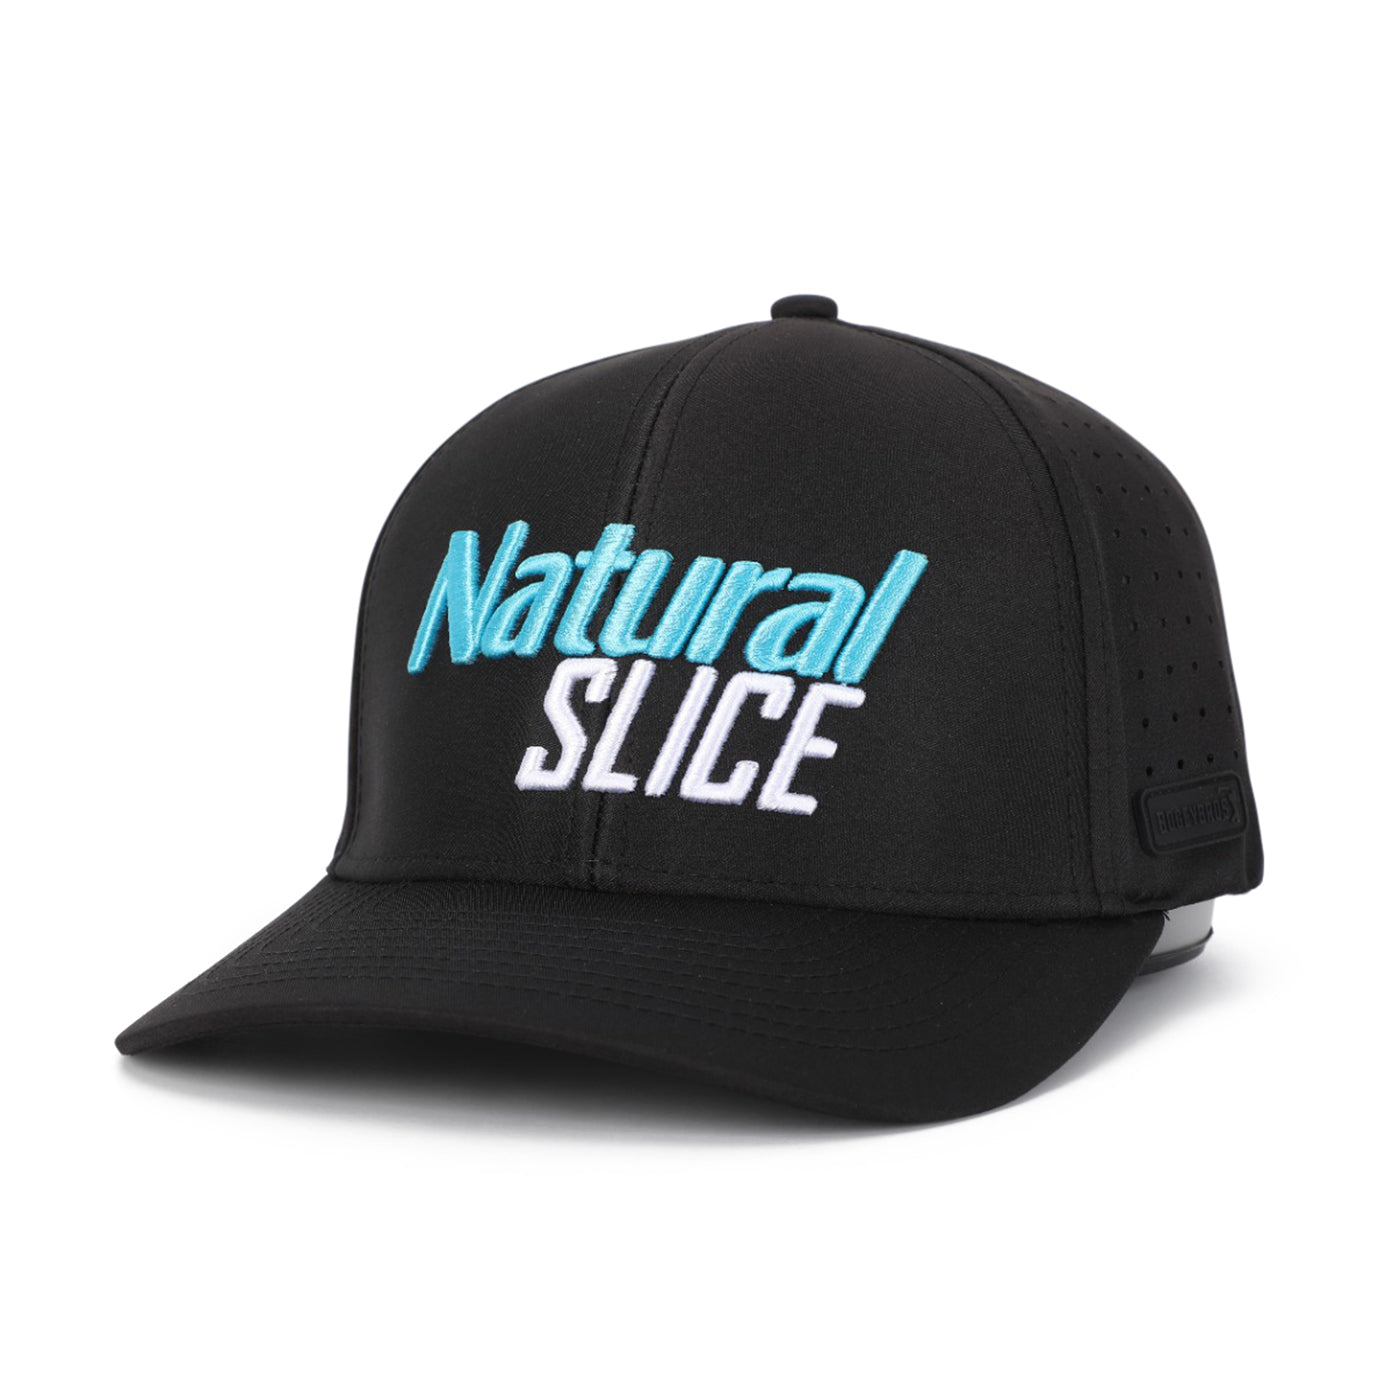 Natural Slice - Performance Golf Hat - Fitted